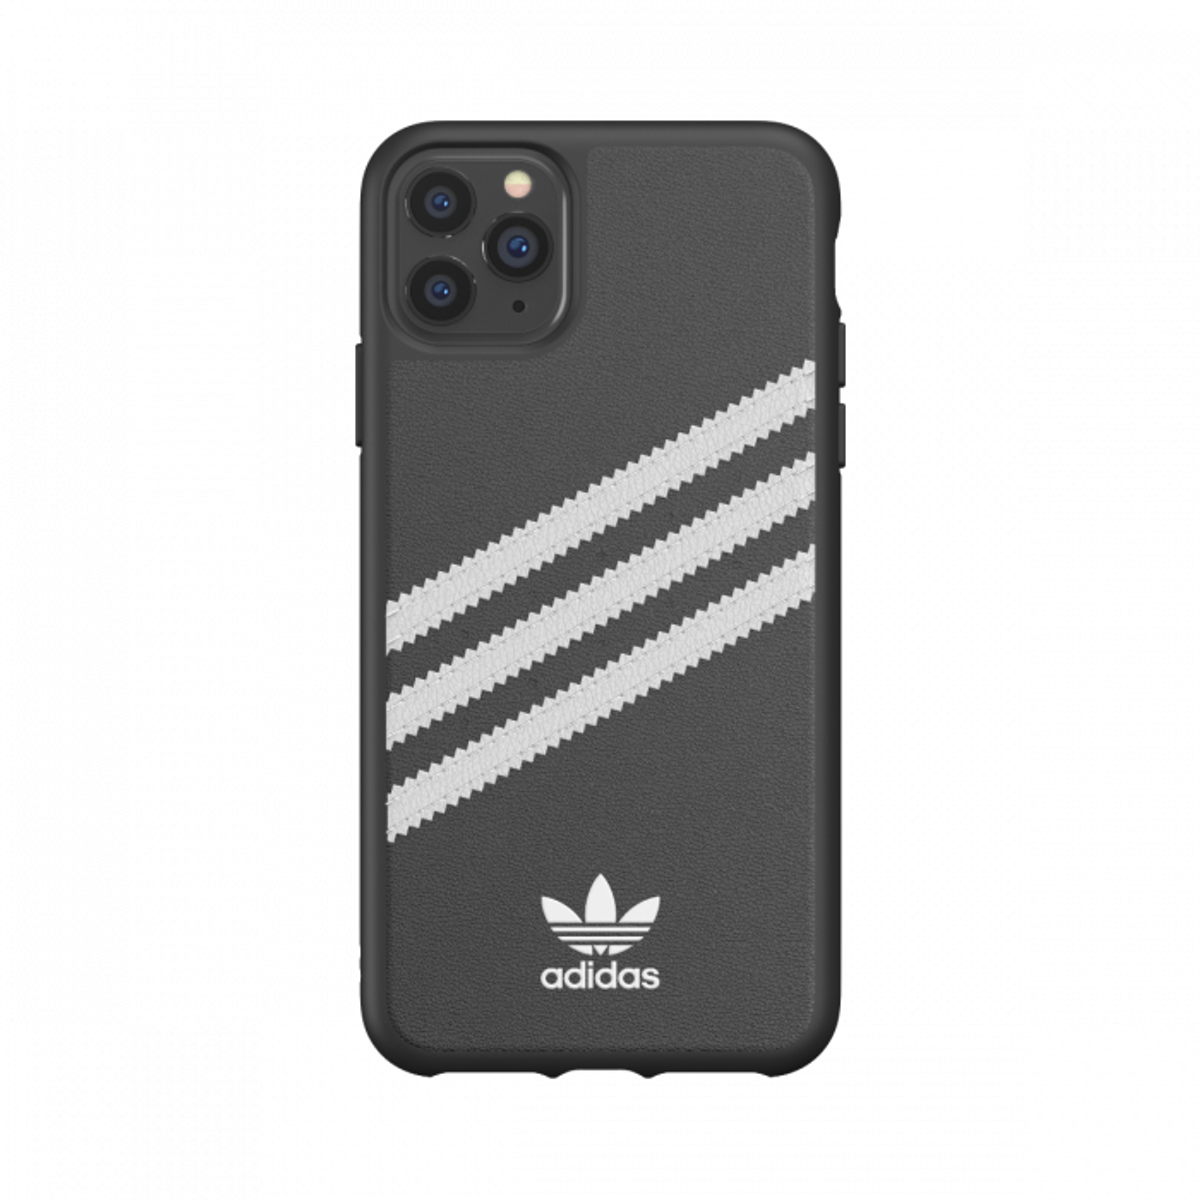 ADIDAS Moulded Case PU, BLACK 11 PRO MAX, APPLE, IPHONE Bookcover